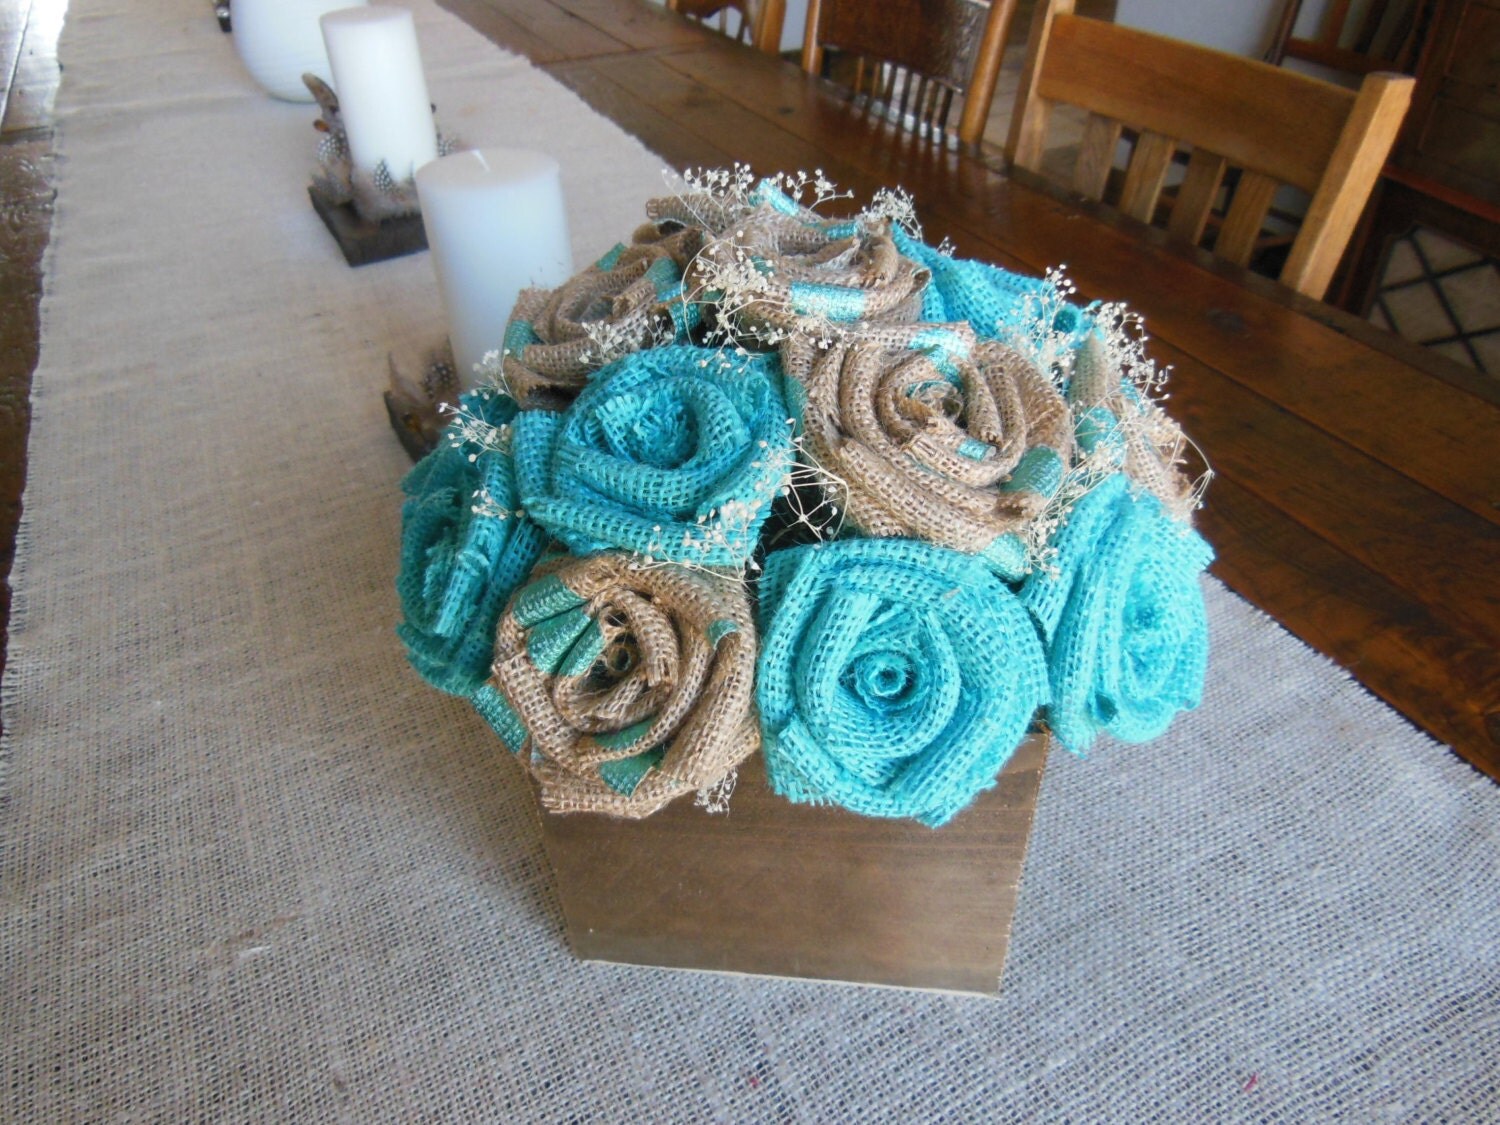 Light turquoise burlap flowers in a rustic barn wood box